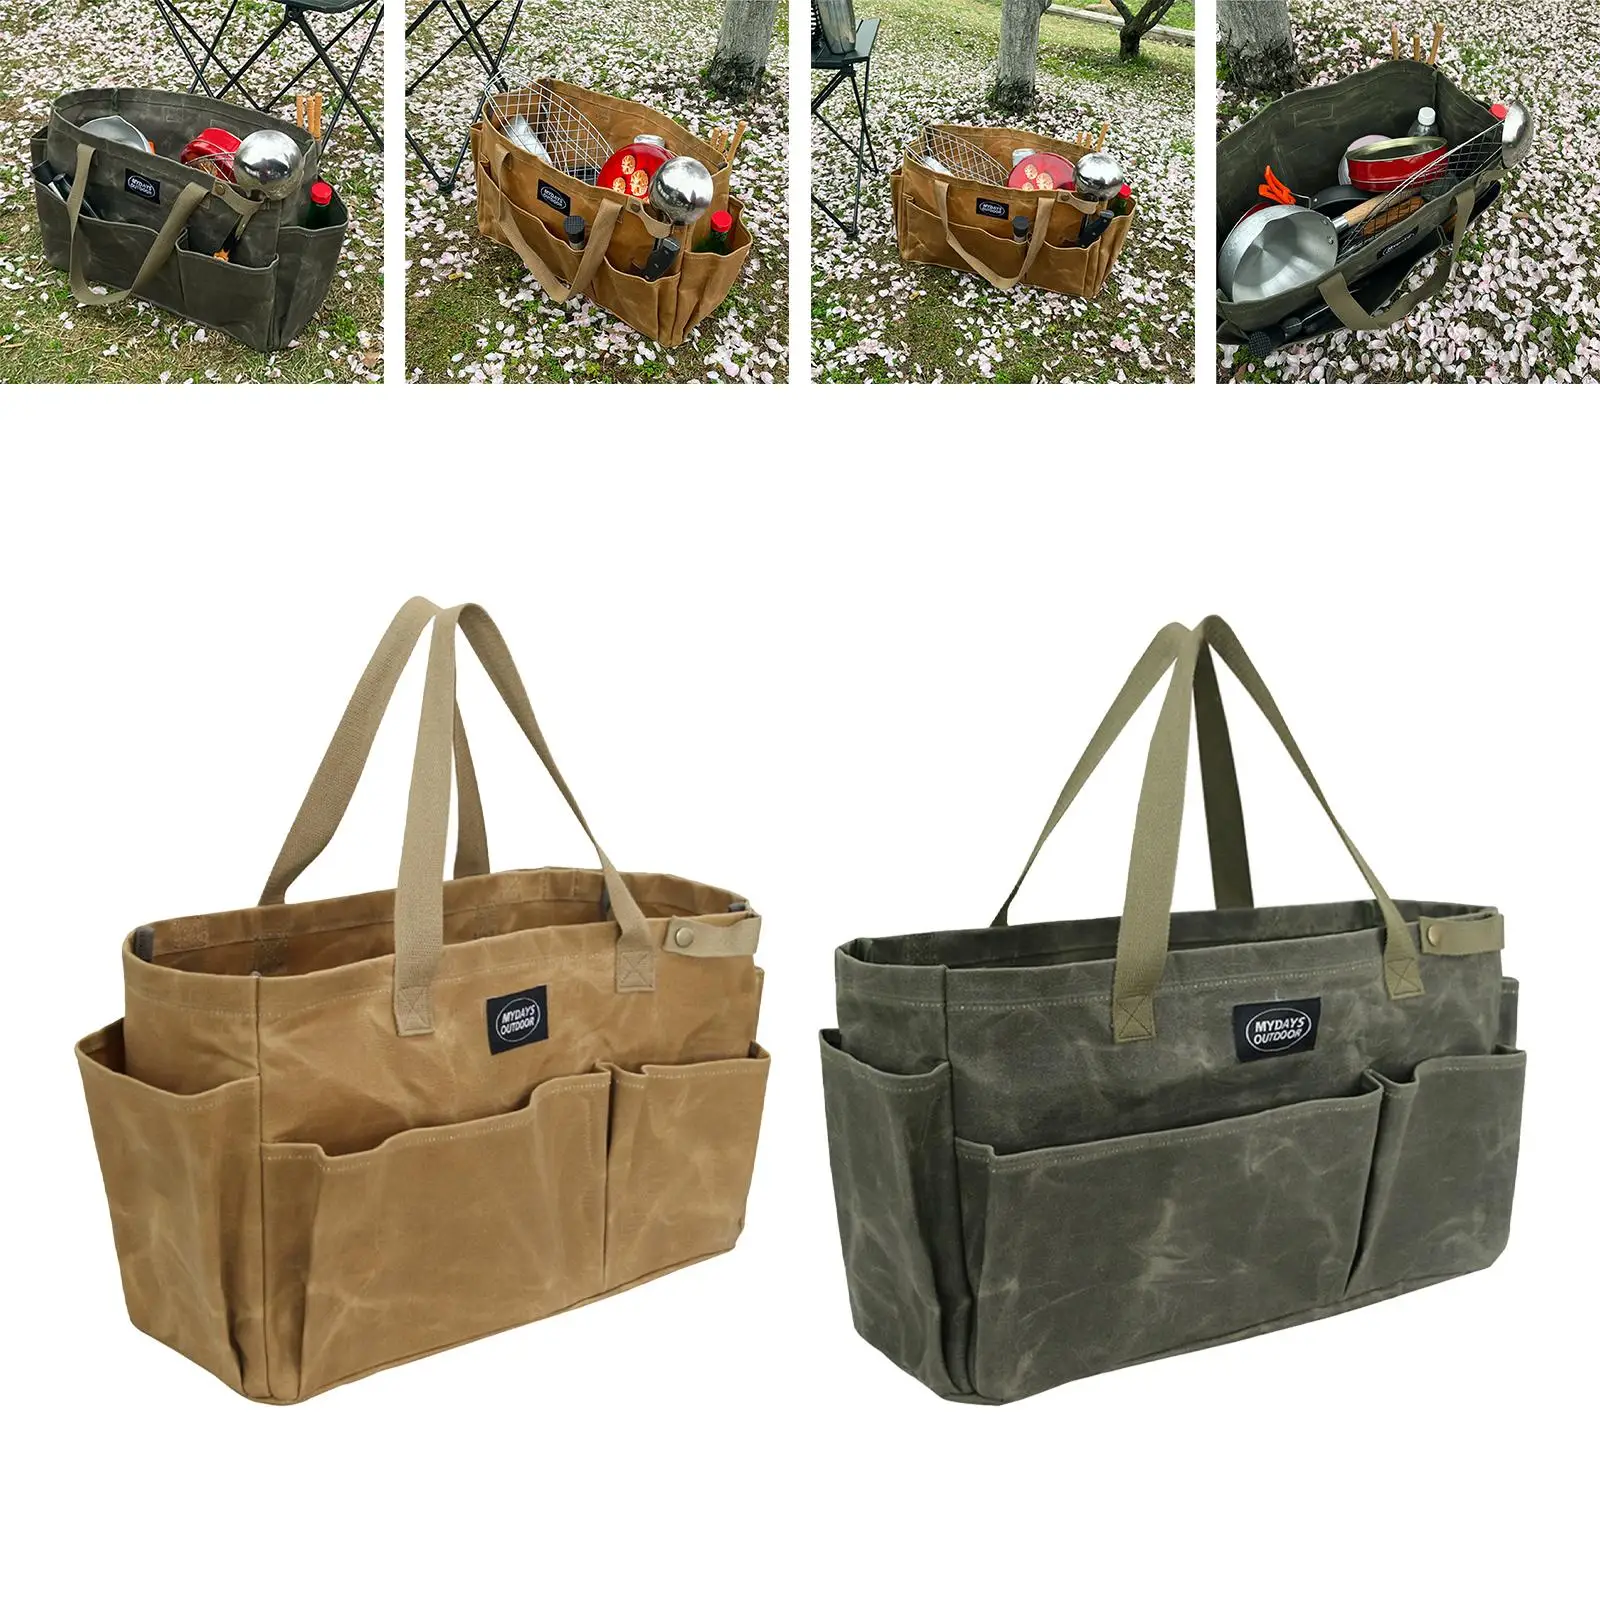 Camping Gear Storage Bag Cookware Carrier Multi Purpose Utility Tote Bag for Picnics Equipment Organizing Indoor Outdoor Hiking